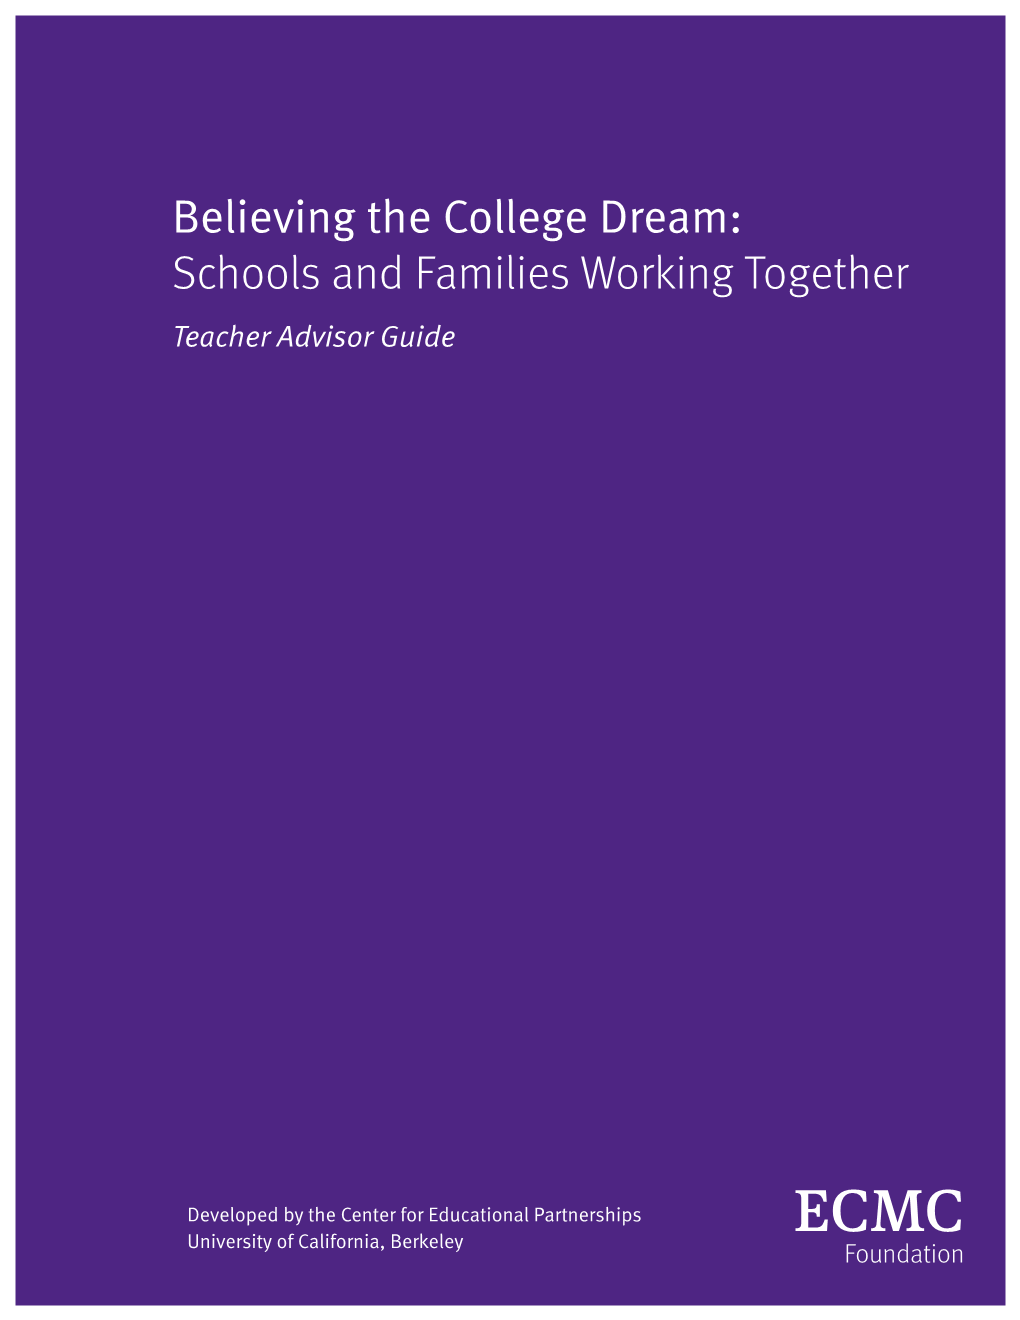 Believing the College Dream: Schools and Families Working Together Teacher Advisor Guide